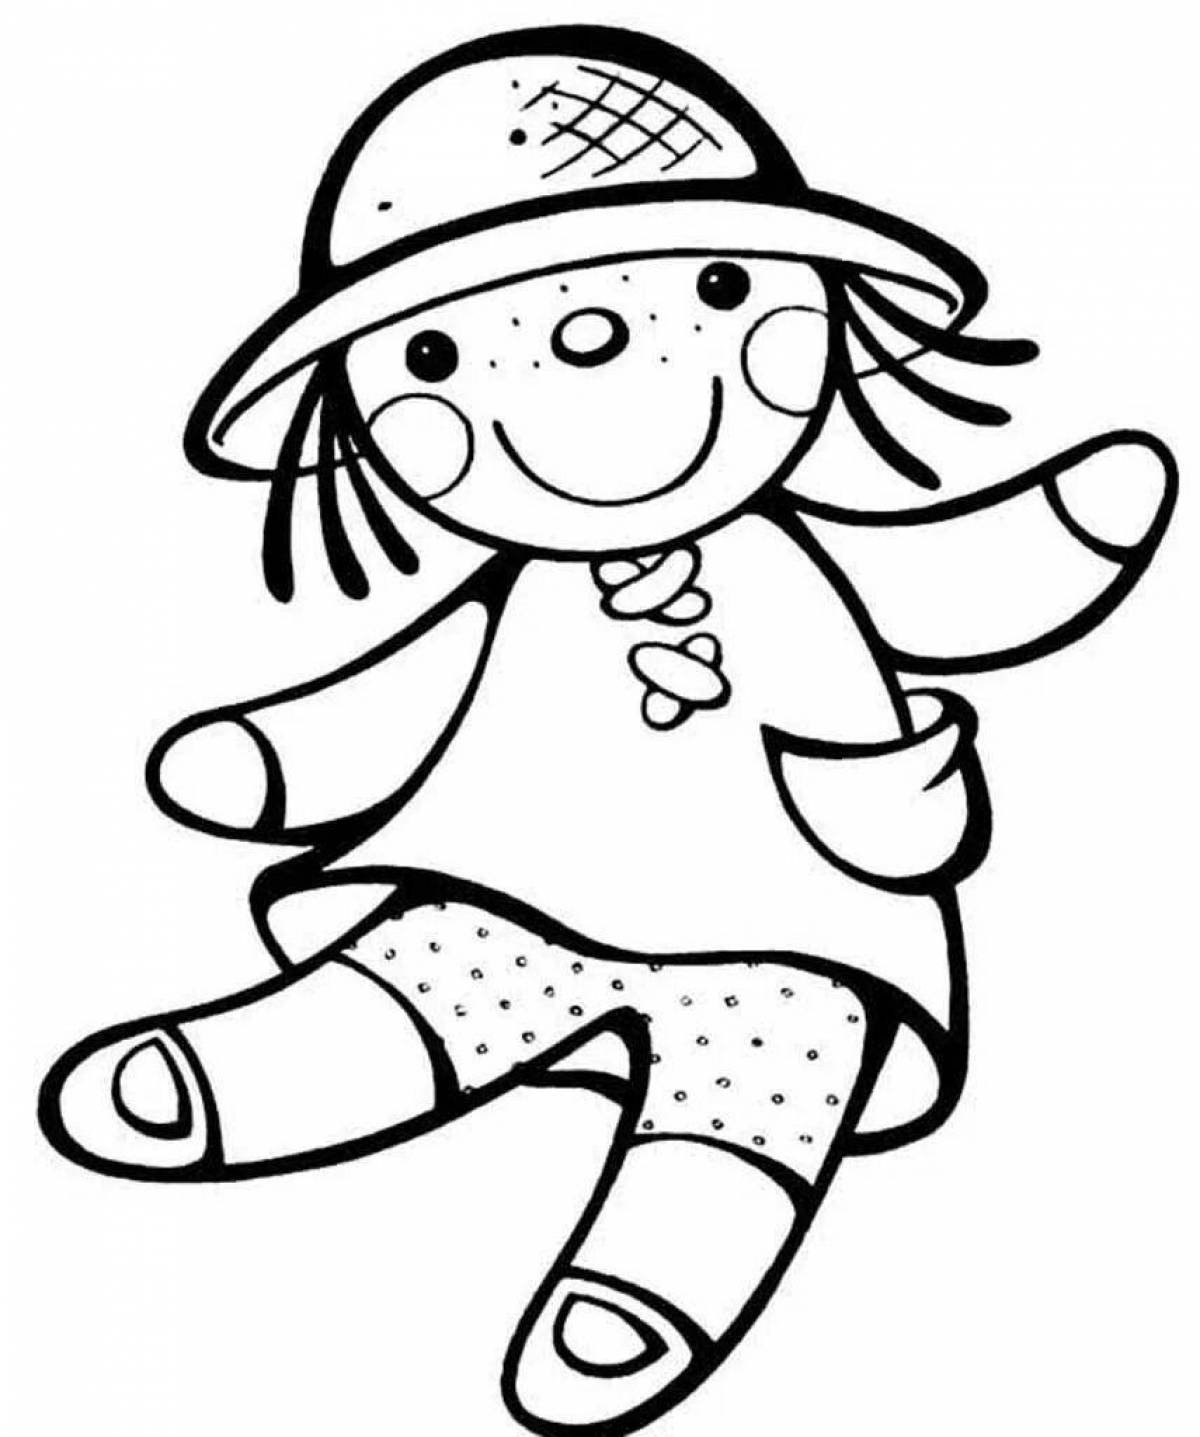 Coloring book brave doll